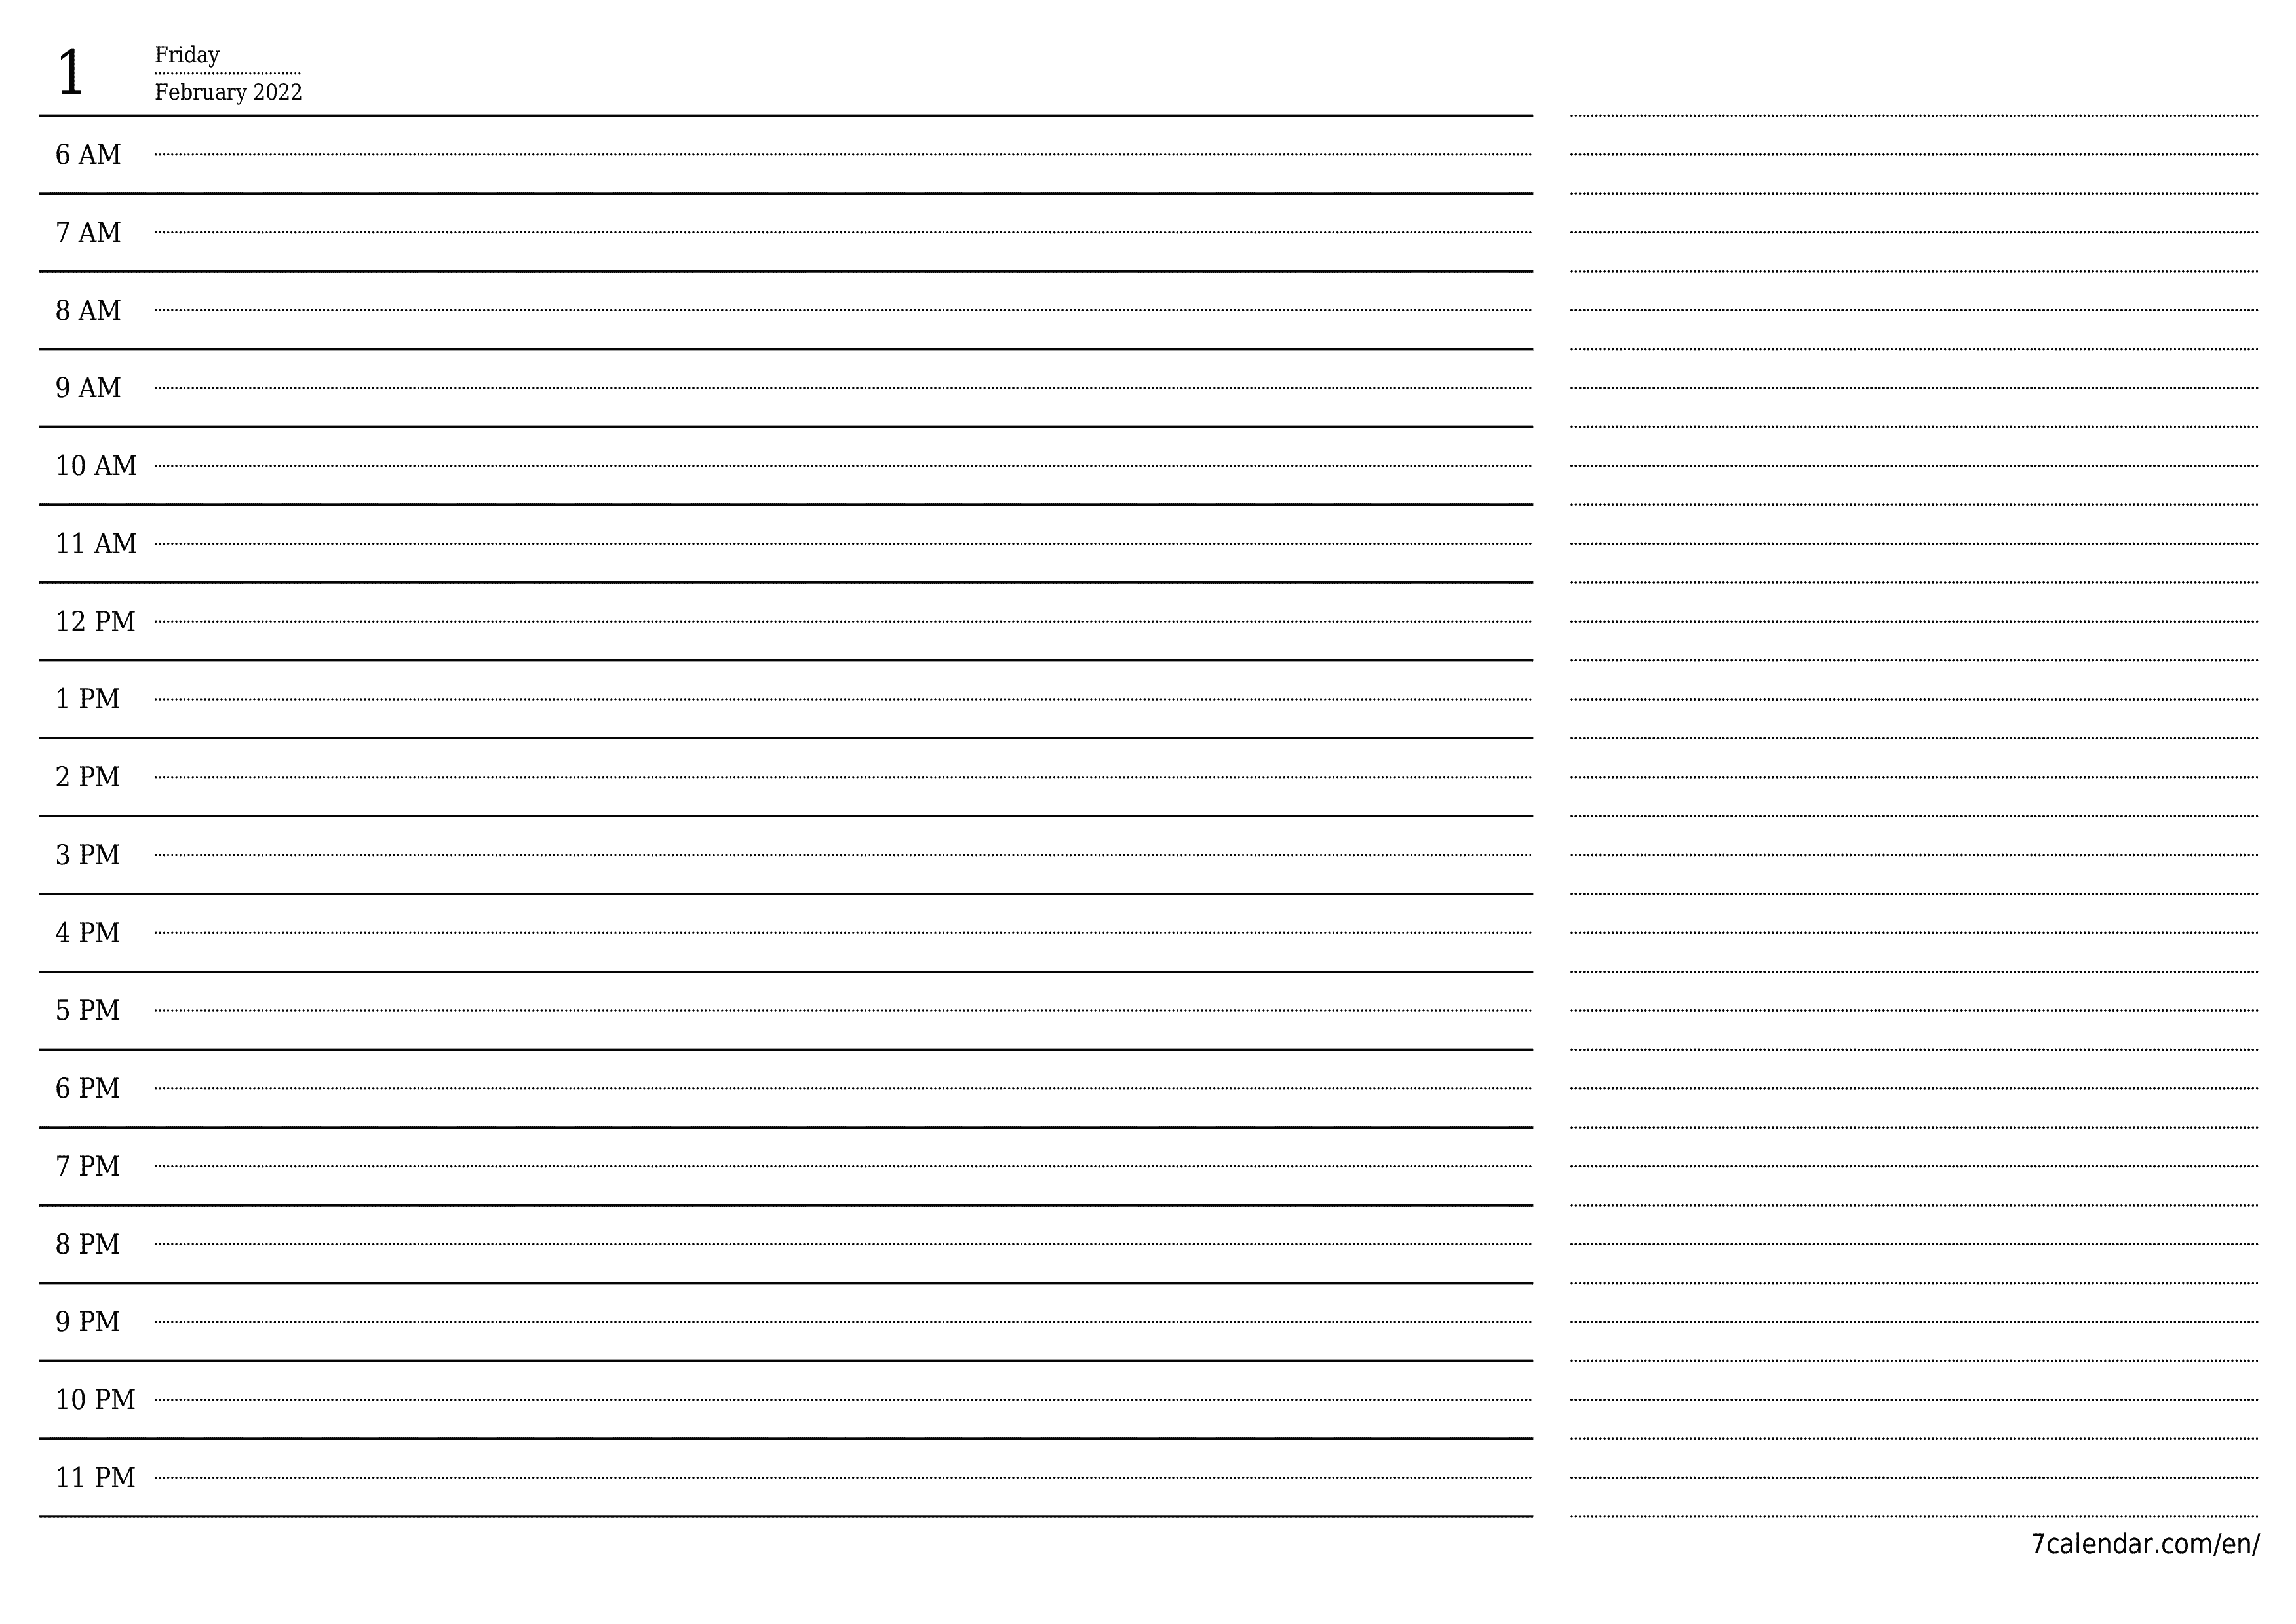 Blank daily printable calendar and planner for day February 2022 with notes, save and print to PDF PNG English - 7calendar.com